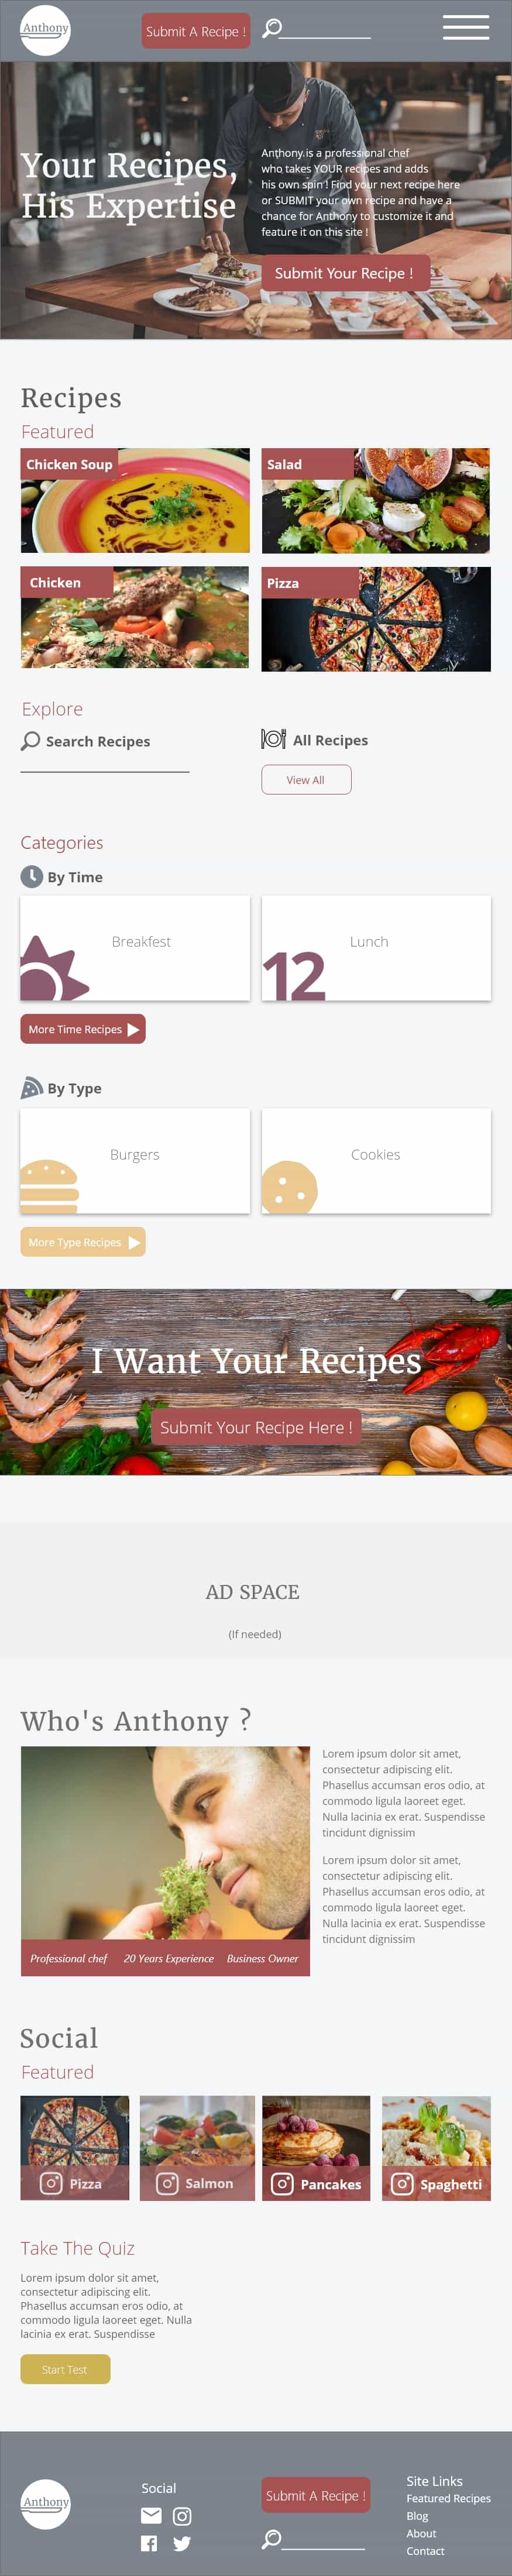 tablet design of a chef website, less whitespace. Title says 'your recipes, his expertise'. Designs contains yellow, red, gray and white color. Text is included and styled. Images of a chef, pizza and food are included in designs